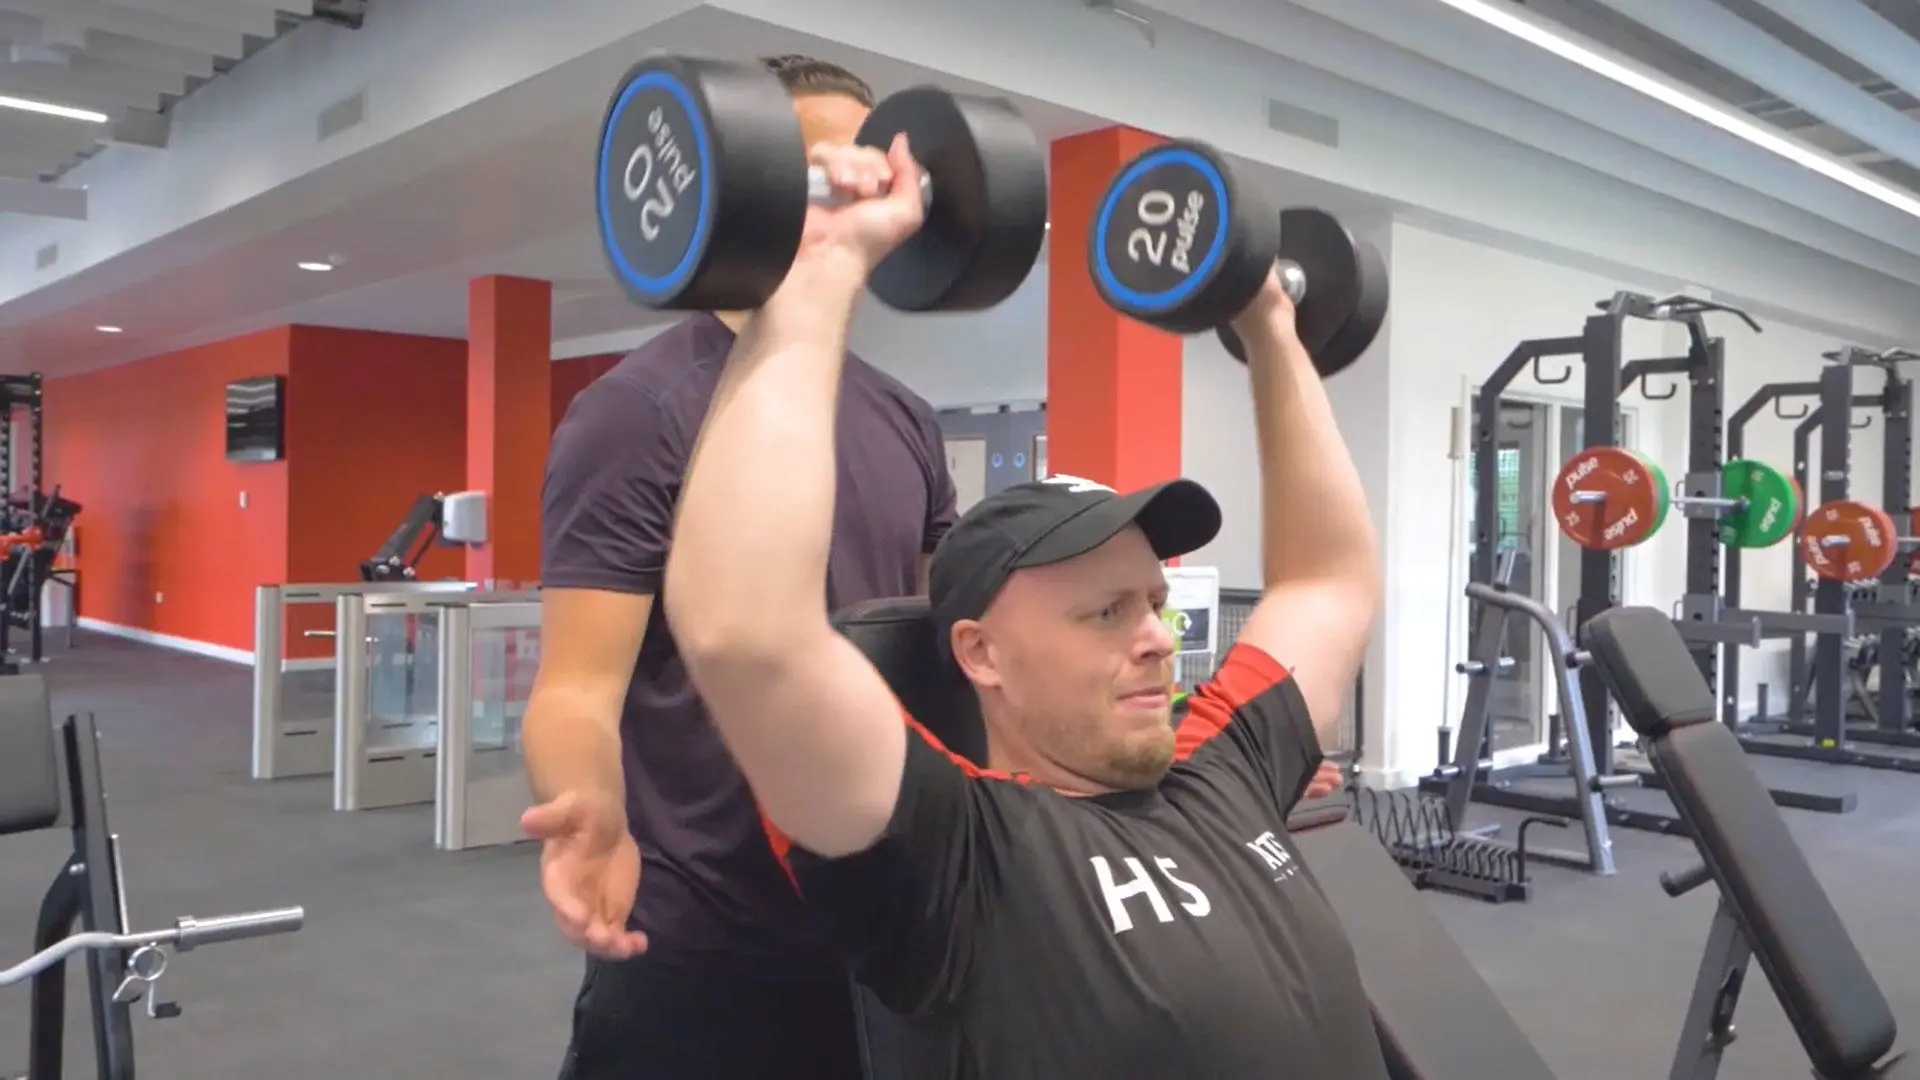 A person lifting hand weights in the gym